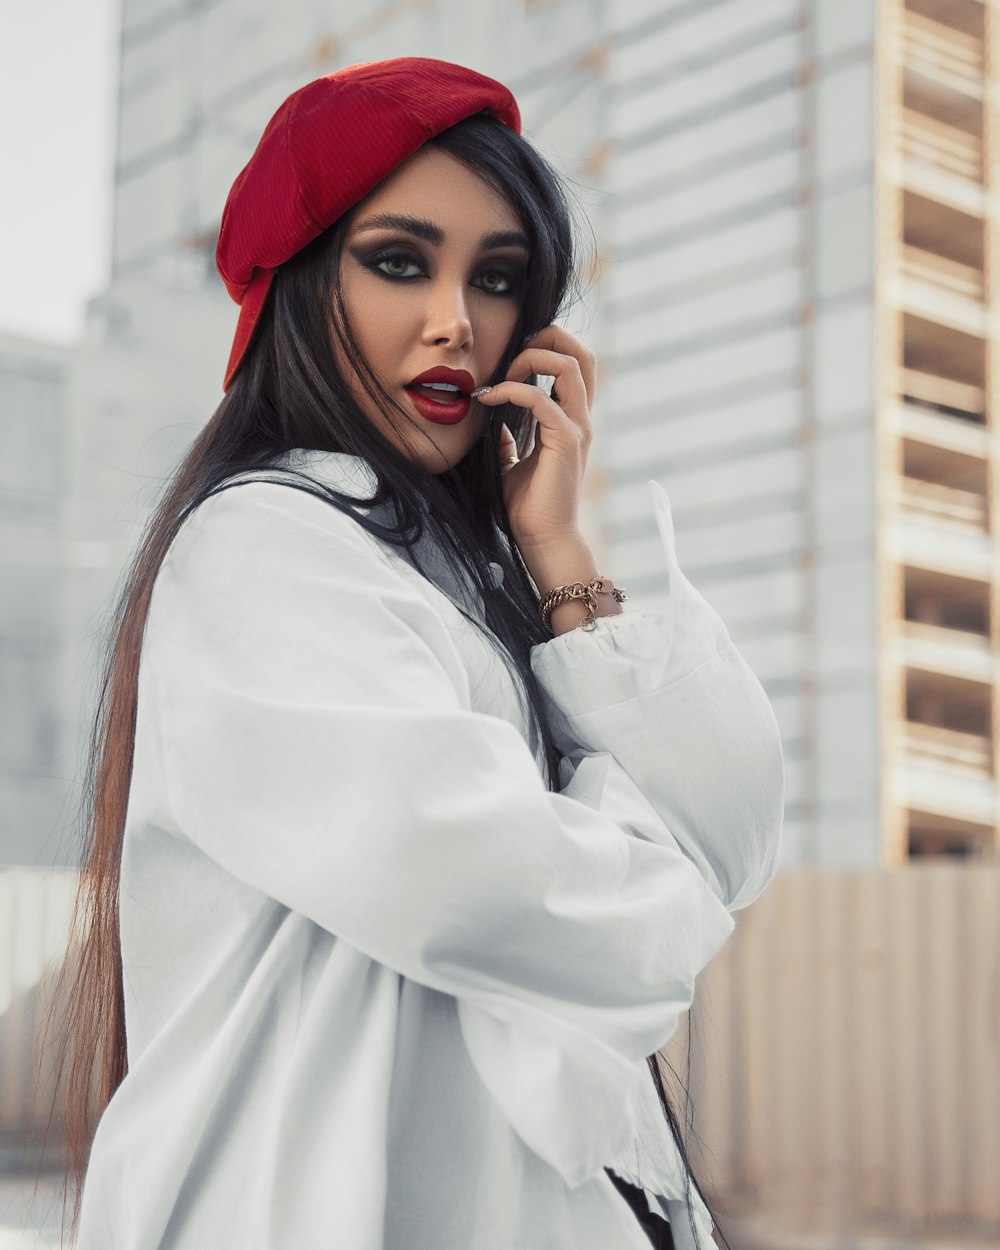 woman in white long sleeve shirt wearing red hat